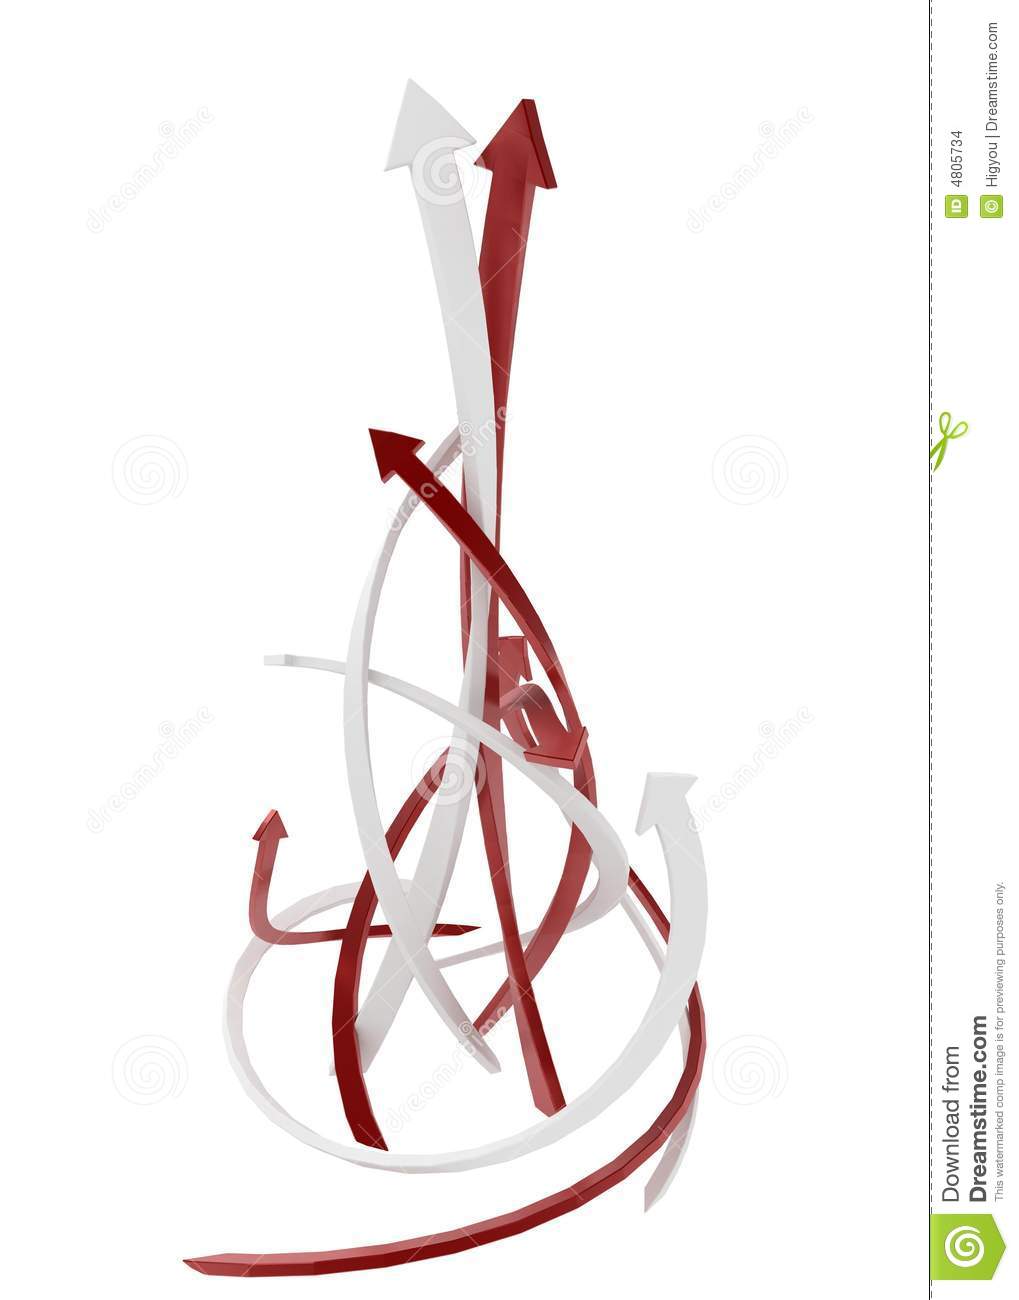 Rising Tangled Arrows Stock Images   Image  4805734